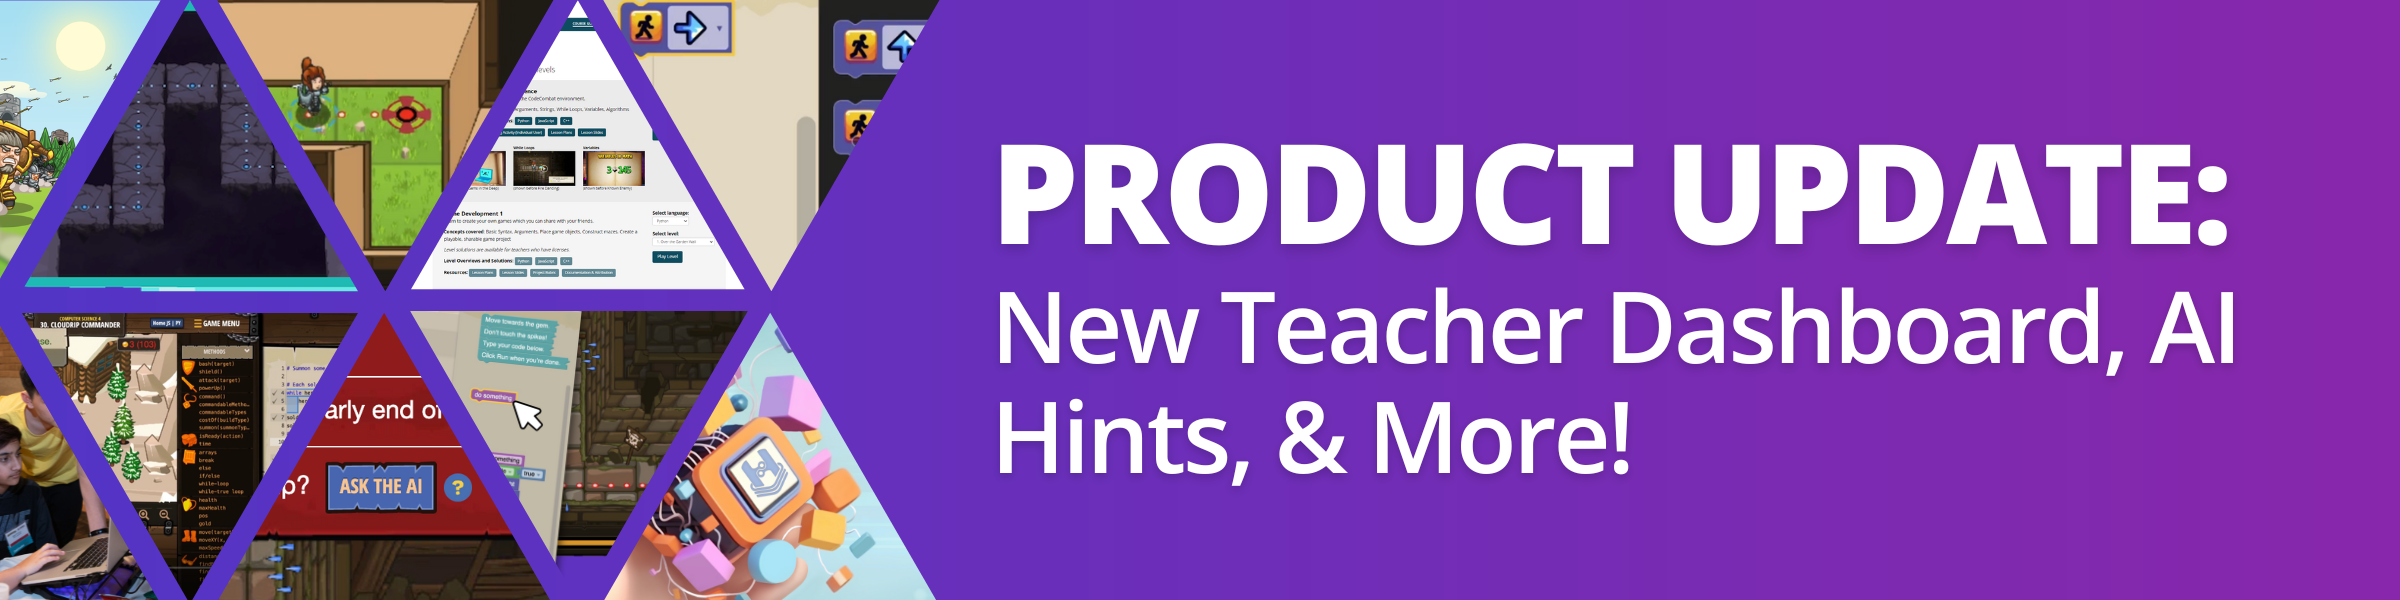 Product Update: New Teacher Dashboard, AI Hints, & More!